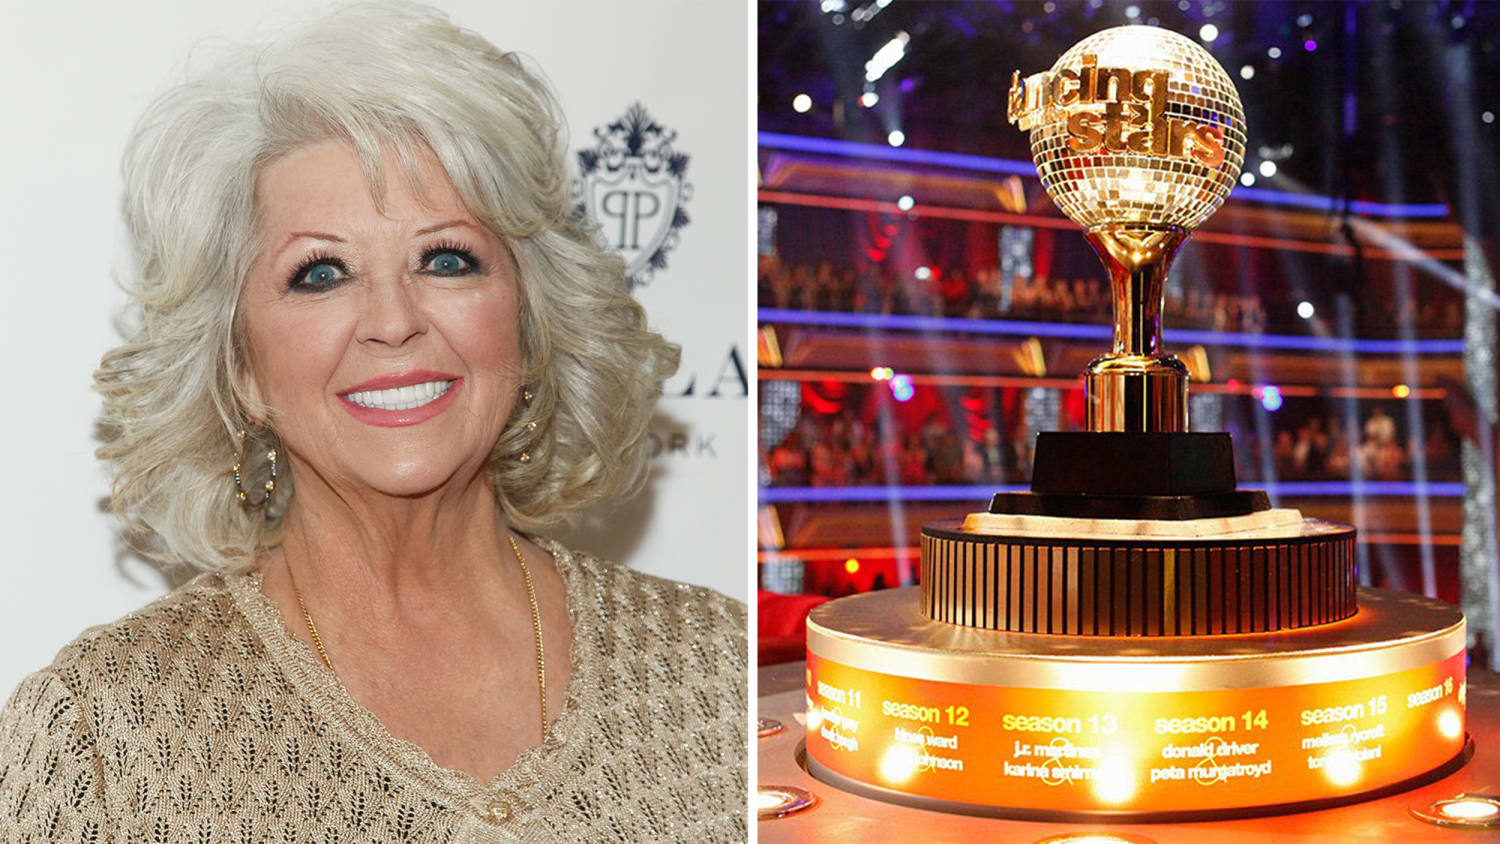 Paula Deen joins new season of 'Dancing With the Stars' cast - TODAY.com2500 x 1407